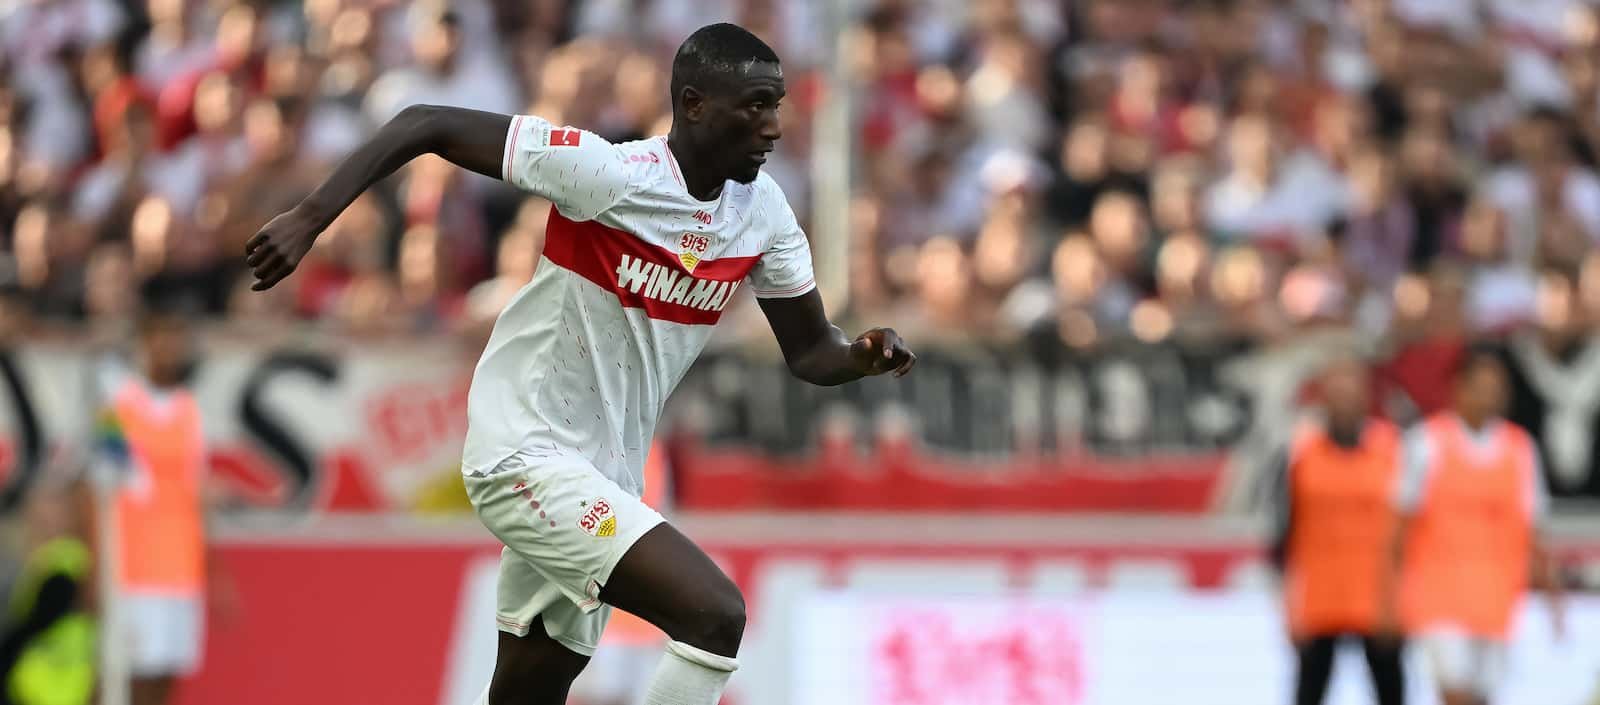 Manchester United’s pursuit of Serhou Guirassy contingent on money from sales – Man United News And Transfer News